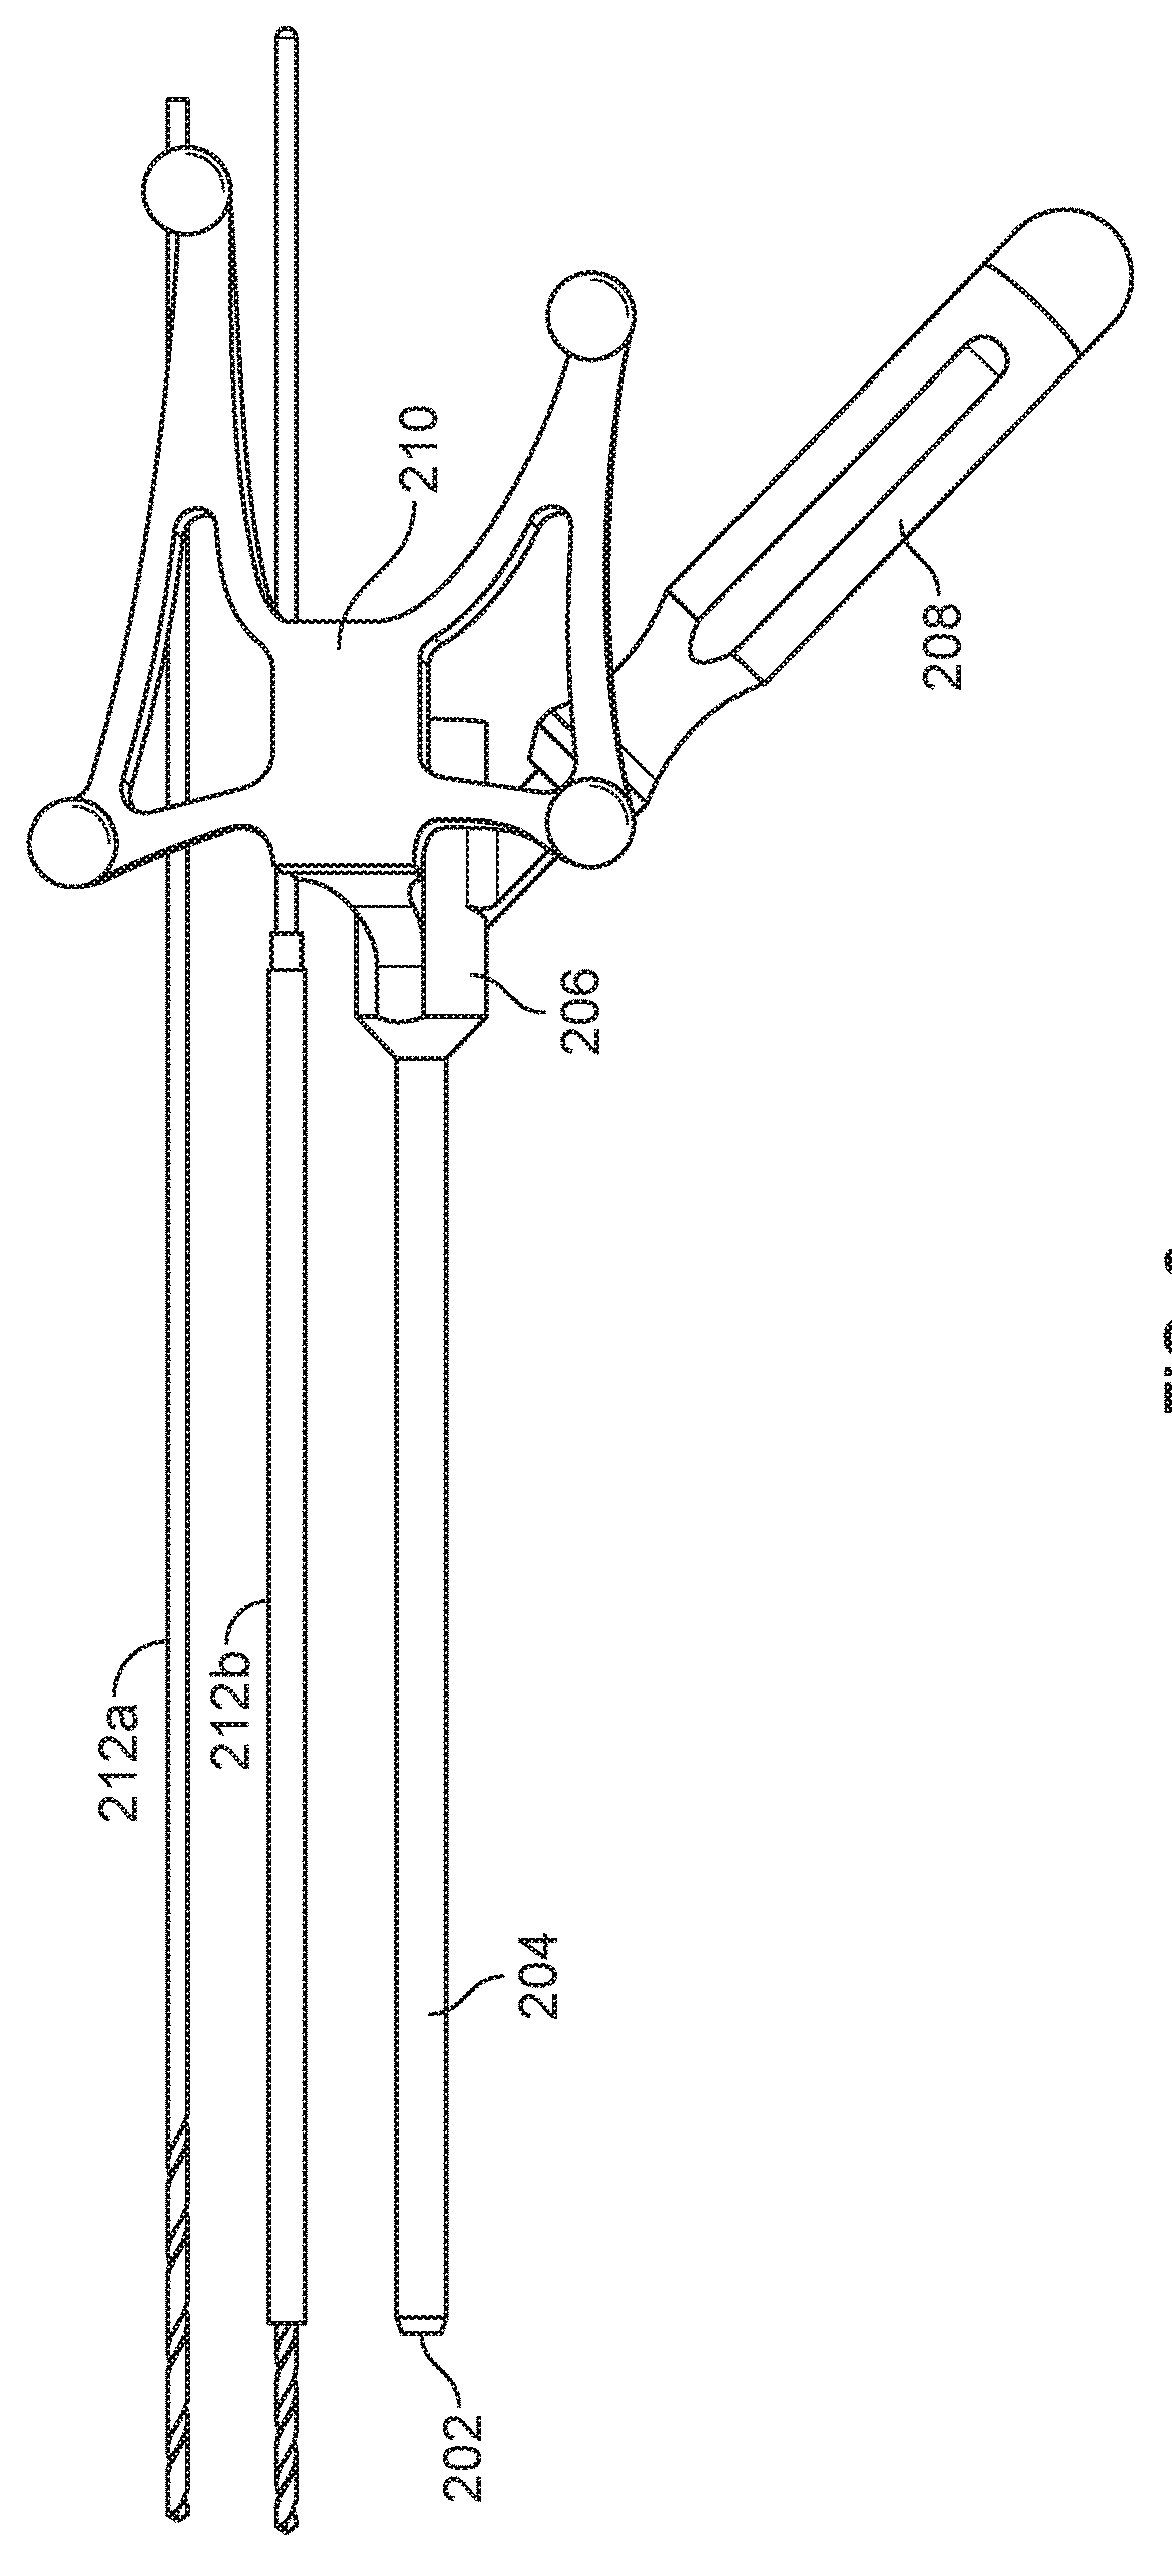 Surgical instrument holder for use with a robotic surgical system